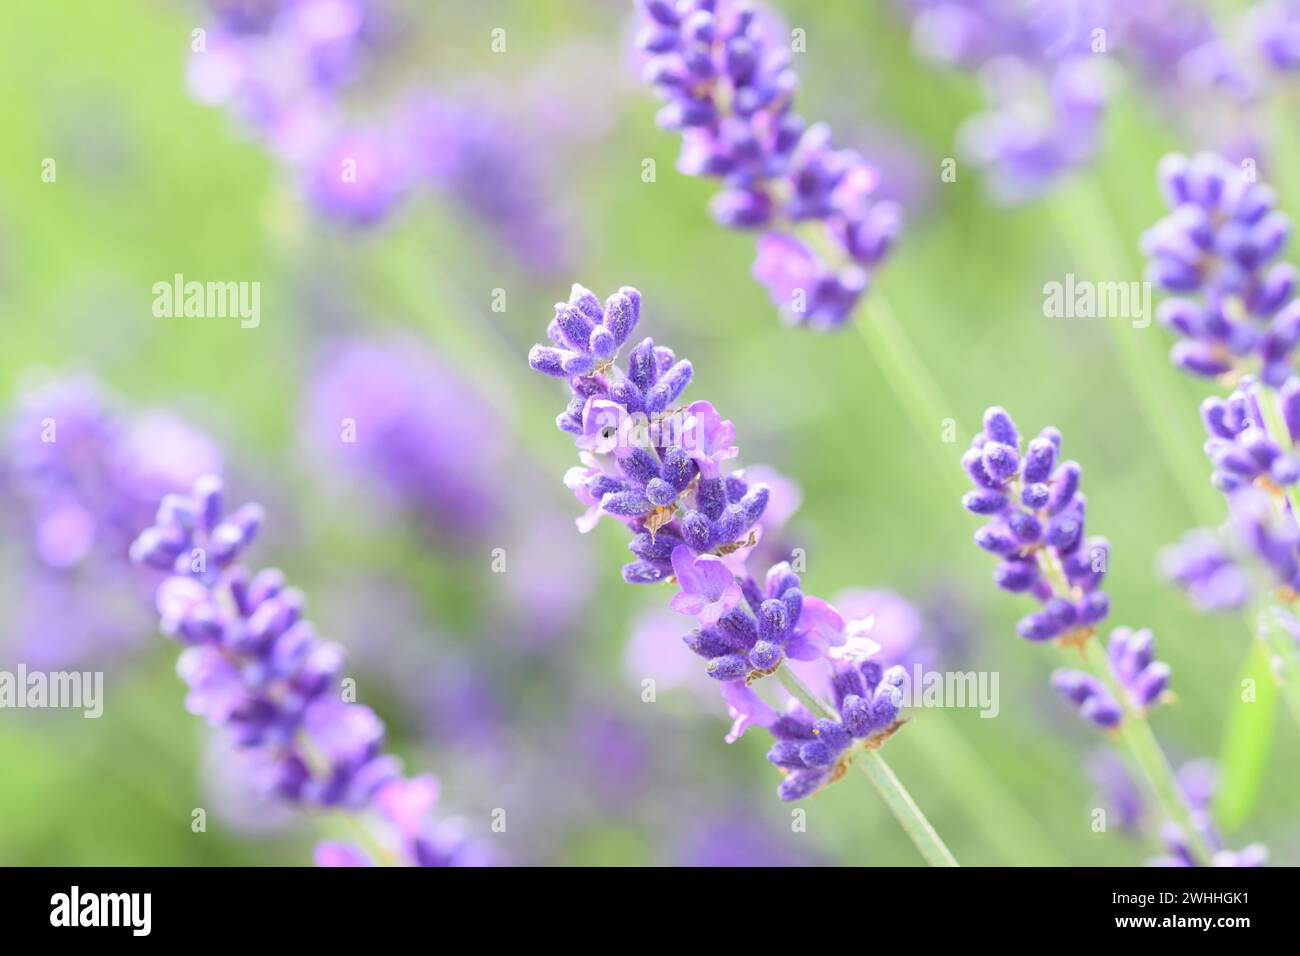 Close-up photograph of Seal Lavender (Lavandula x intermedia 'Seal') with a defocused background Stock Photo